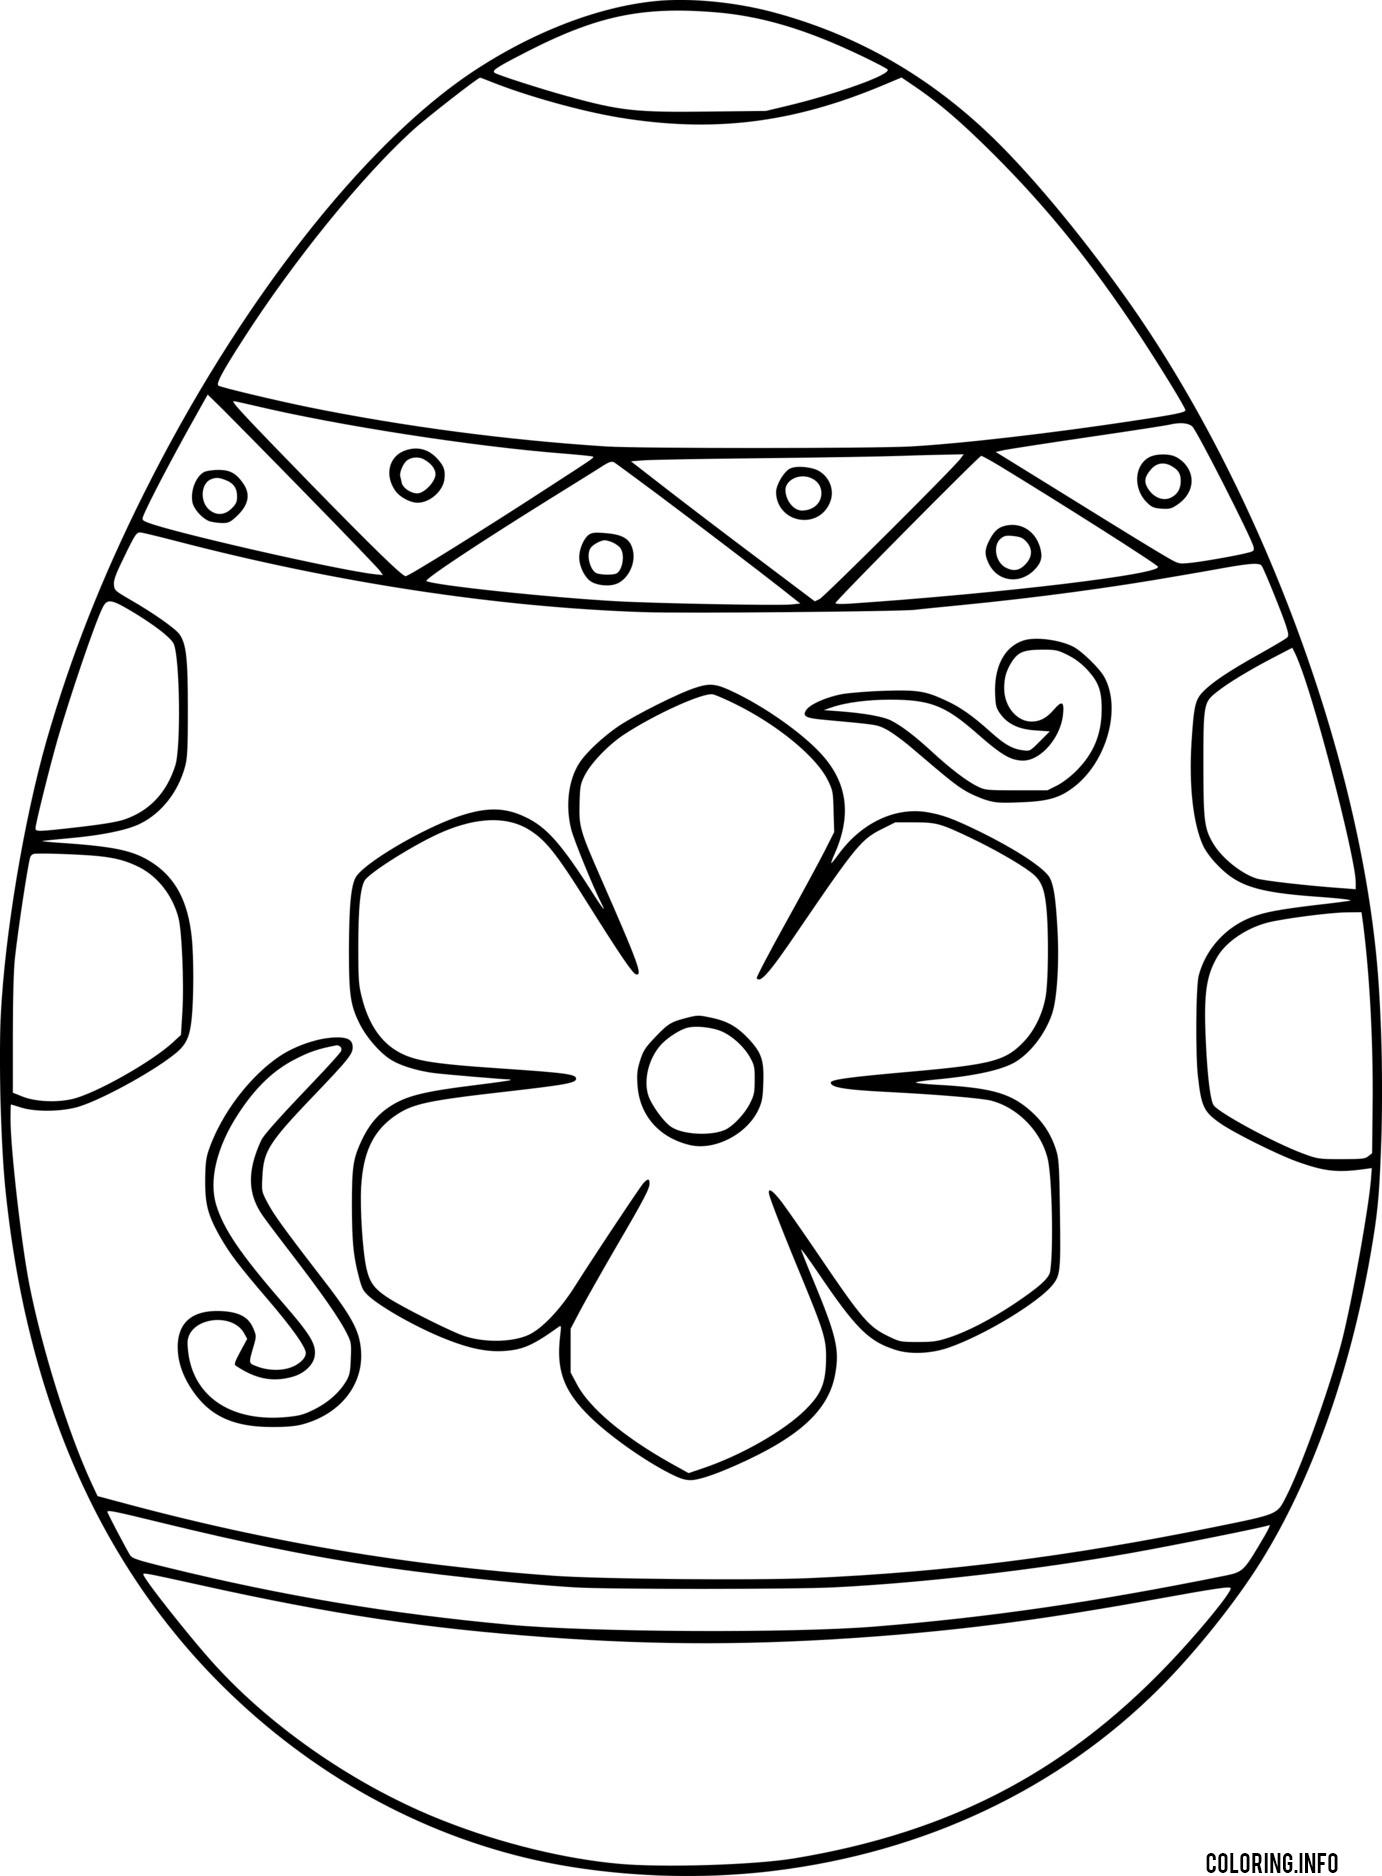 Easter Egg With Flower Pattern coloring